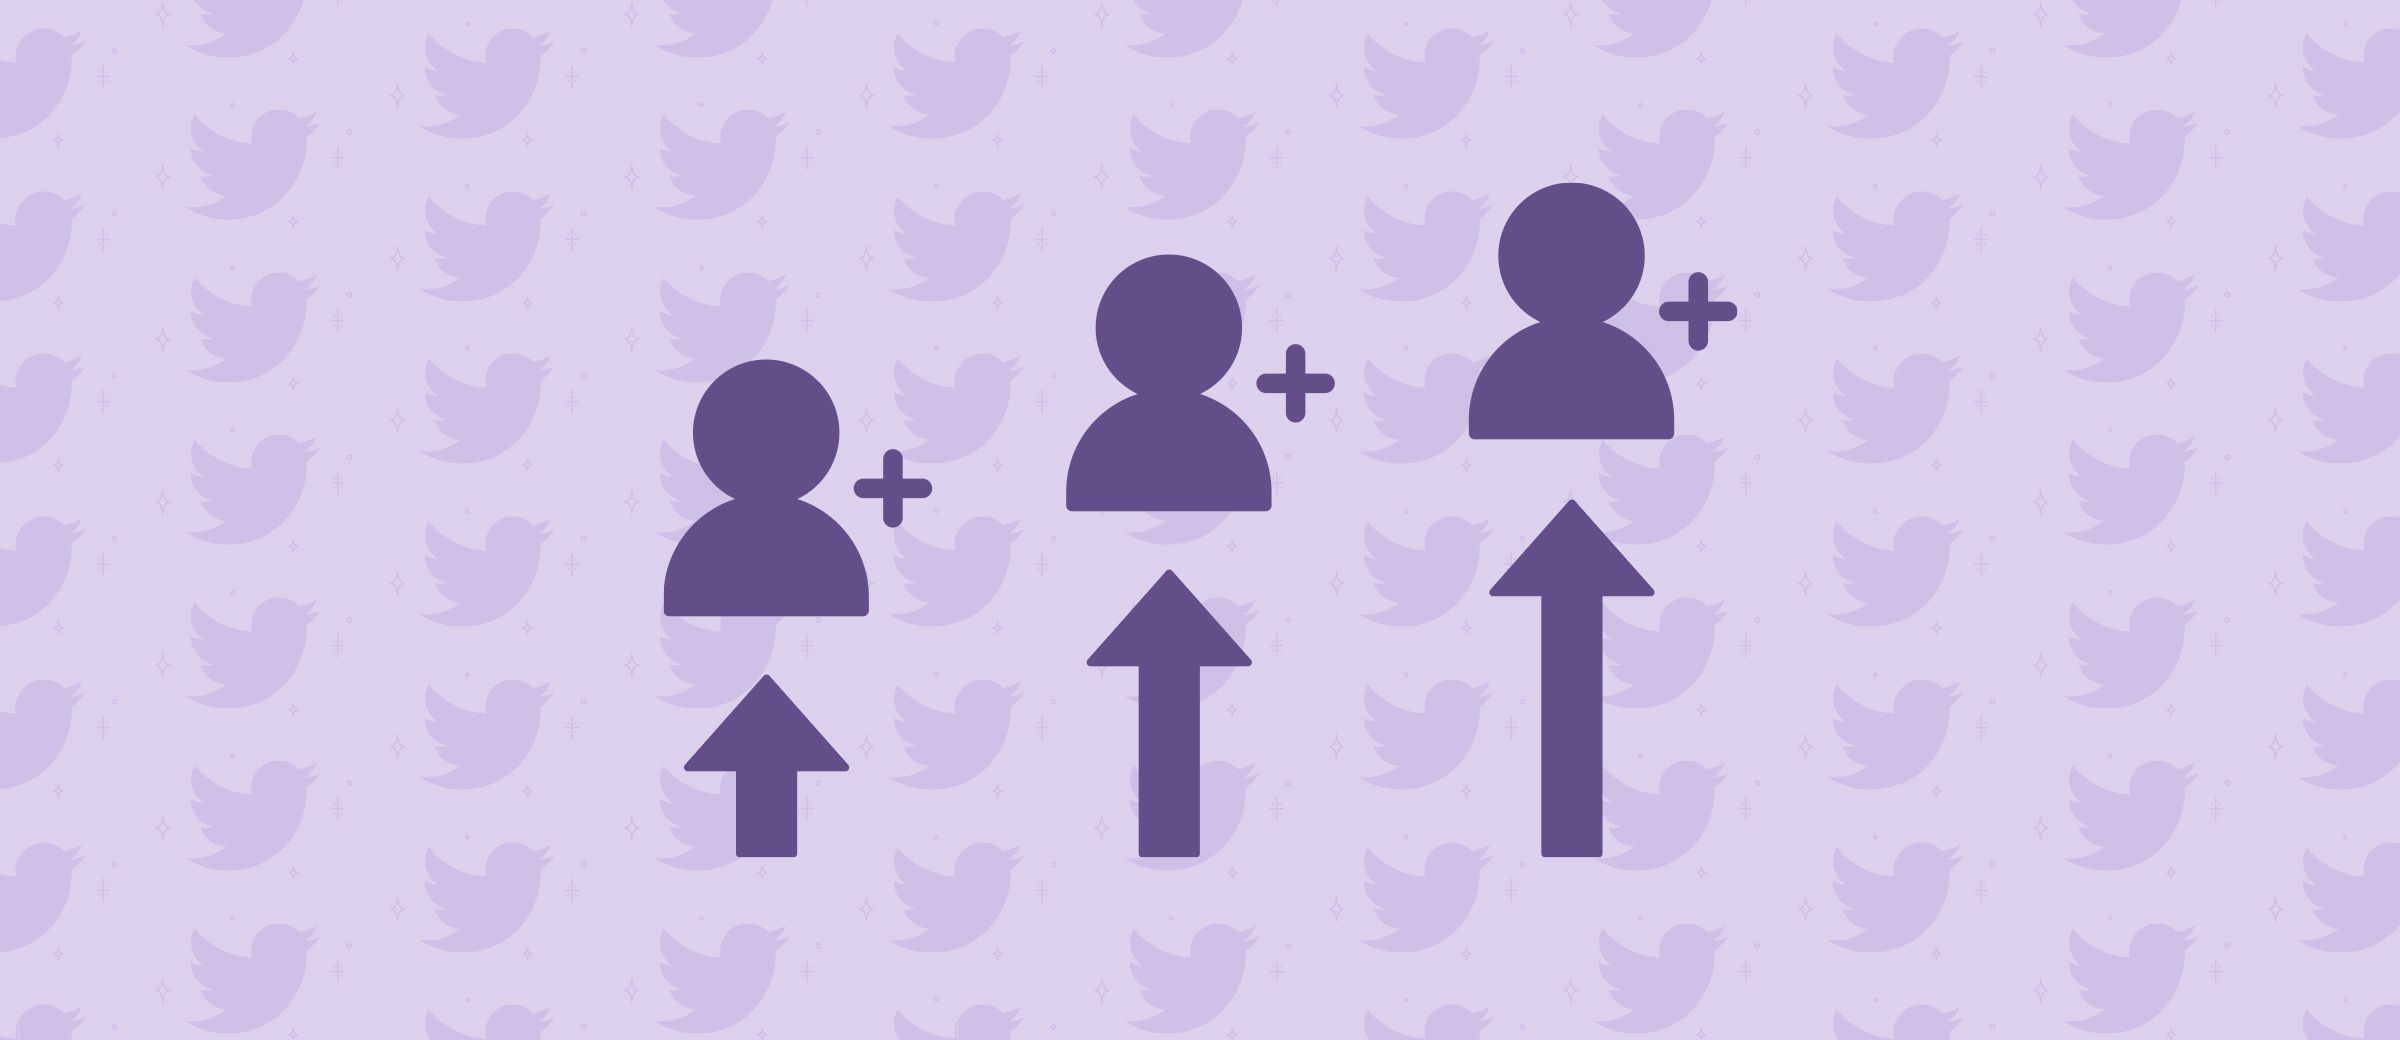 How to Get More Twitter Followers: A Guide for Business Owners